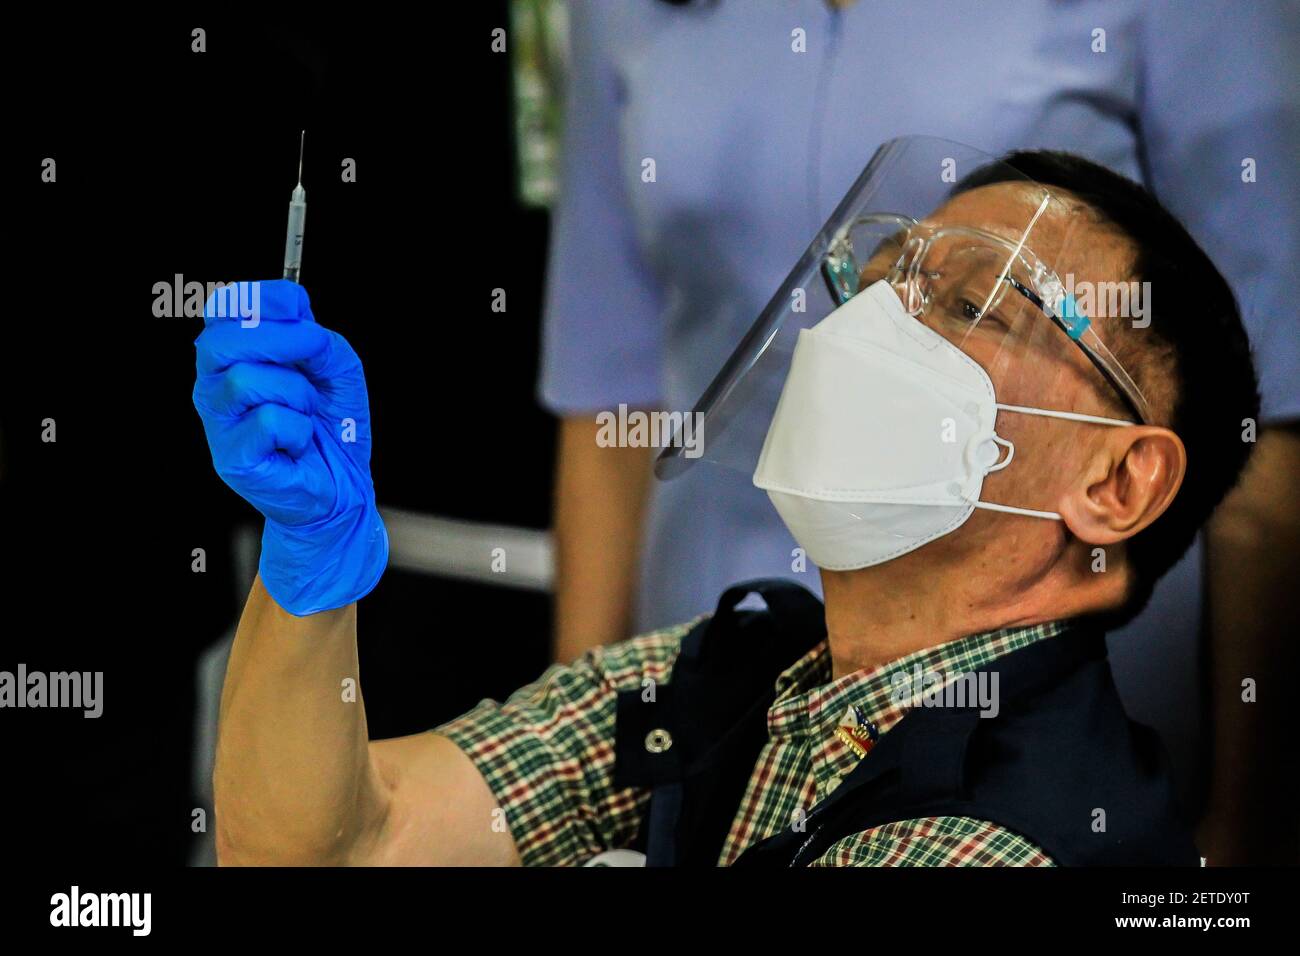 Beijing, China. 1st Mar, 2021. Philippine Department of Health Secretary Francisco Duque III looks at a syringe containing a shot of COVID-19 vaccine from China's Sinovac on the first day of the vaccination at the Lung Center of the Philippines in Manila, the Philippines on March 1, 2021. The Philippines launched its coronavirus vaccination campaign on Monday, less than a day after the arrival of the Sinovac vaccine CoronaVac donated by China. Credit: Rouelle Umali/Xinhua/Alamy Live News Stock Photo